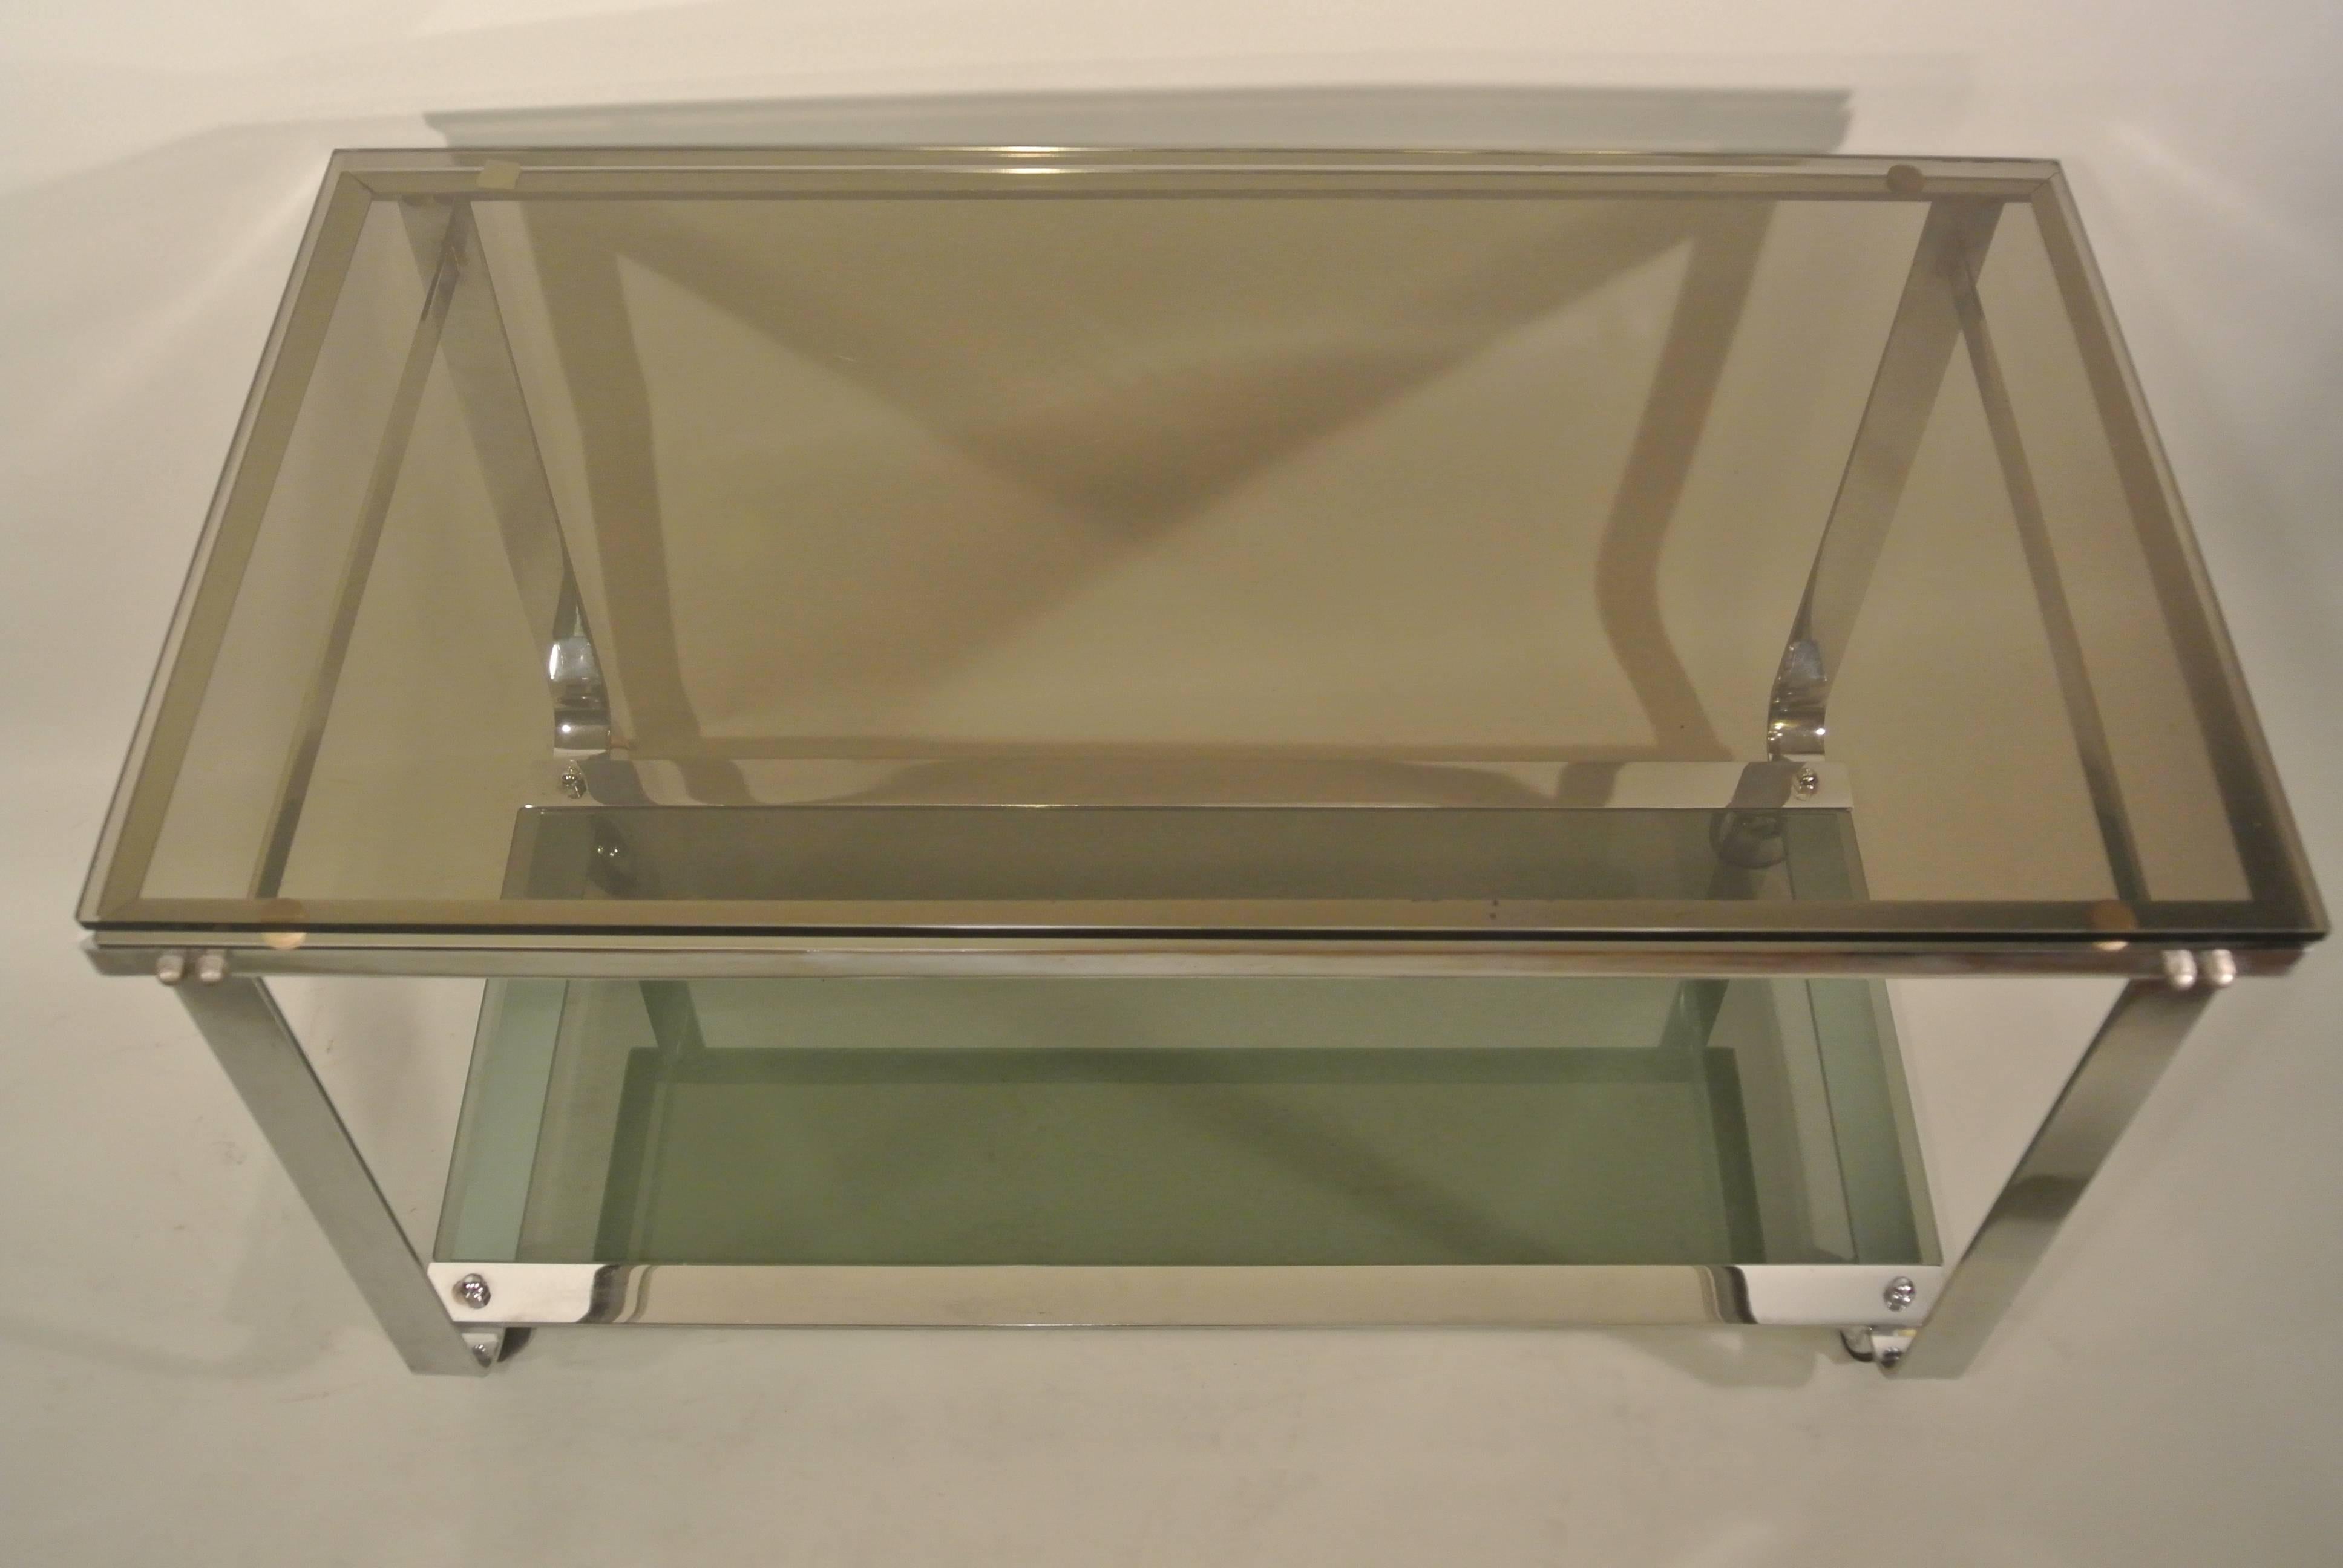 French Mid-Century Chrome Dessert or Bar Cart on Wheels with Tinted Glass, circa 1970